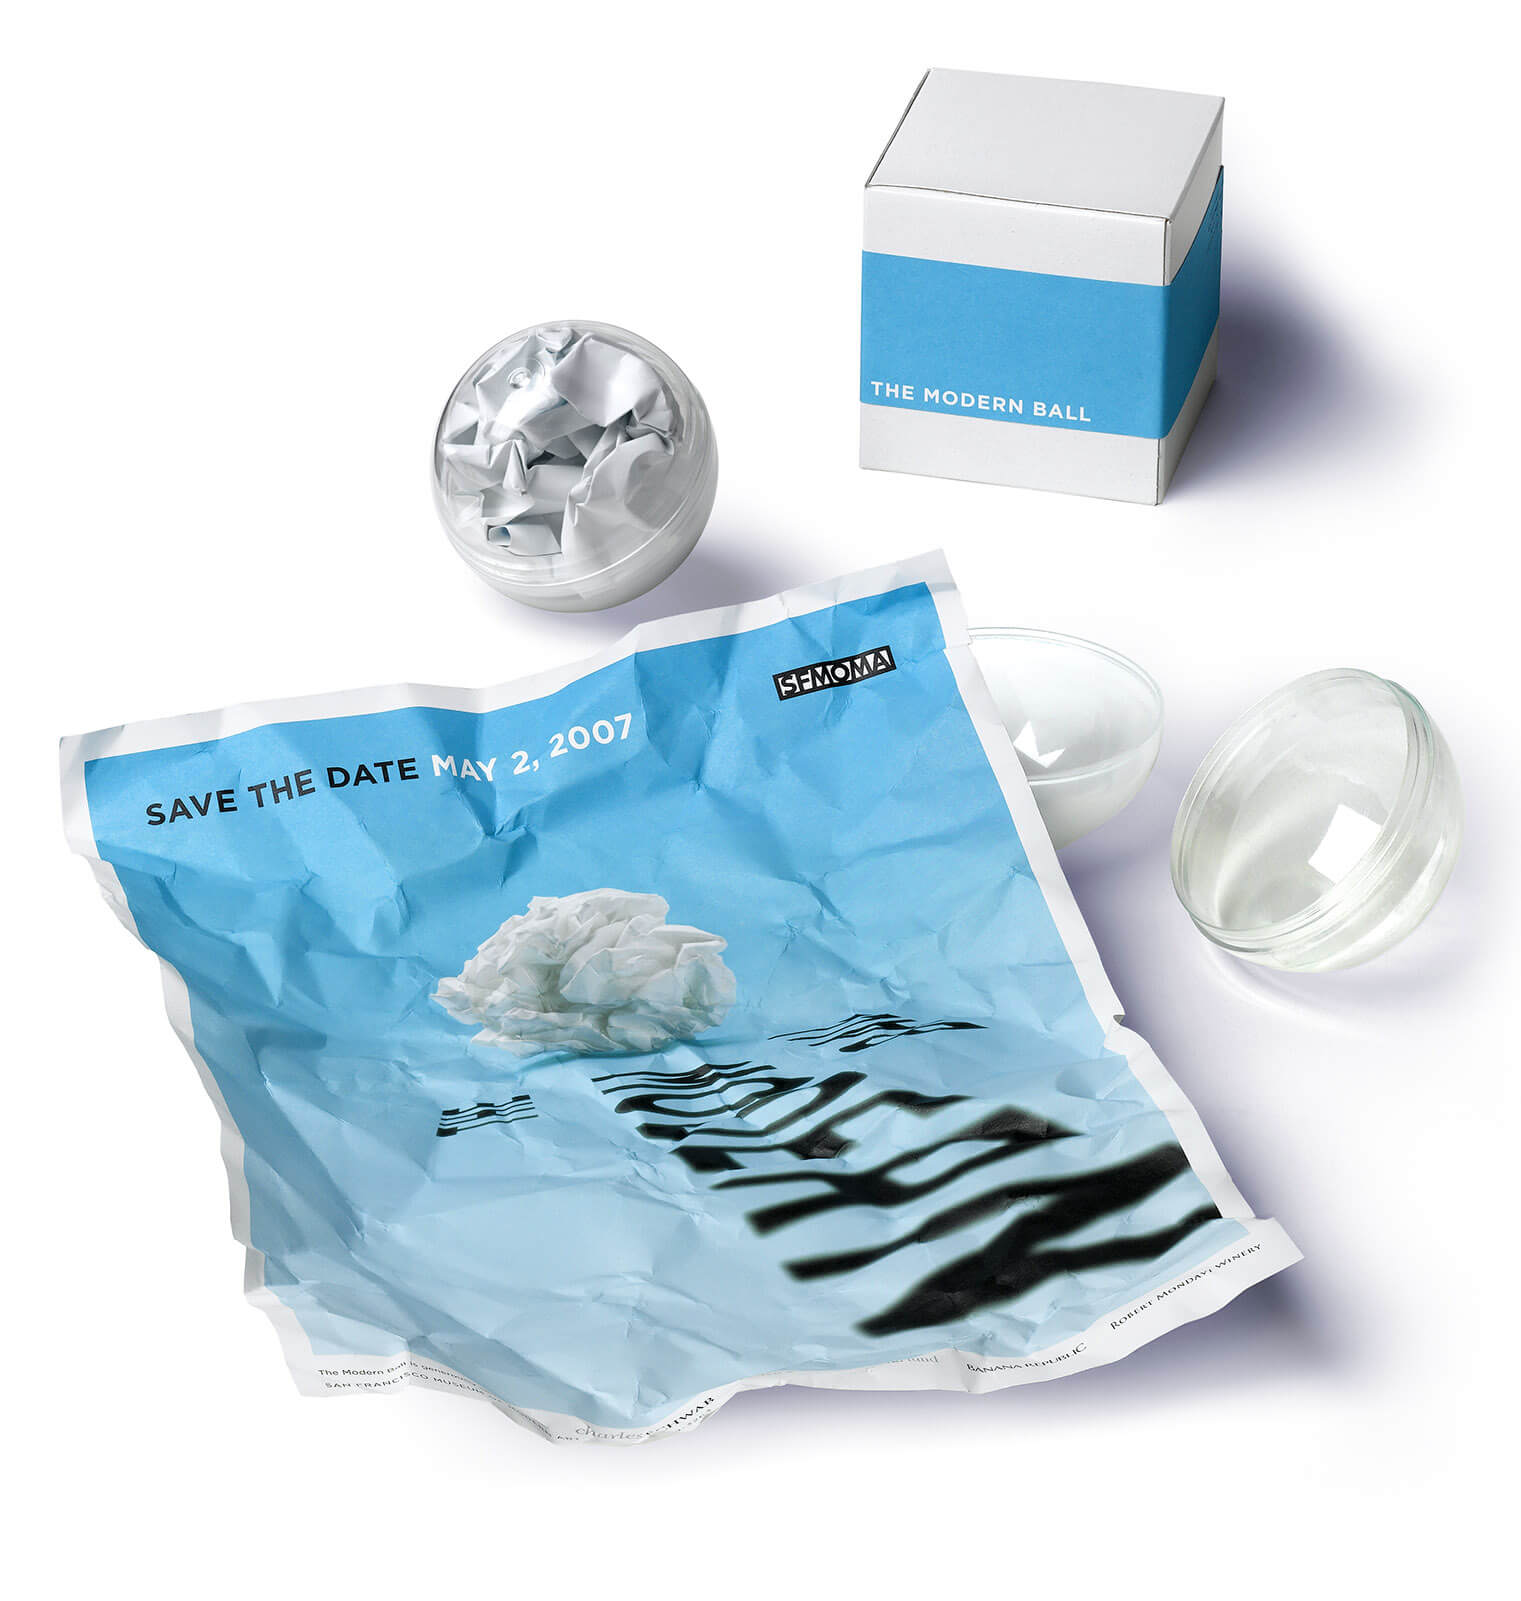 White box with blue band behind a clear plastic sphere containing crumpled paper and an un-crumpled piece of paper with light blue artwork